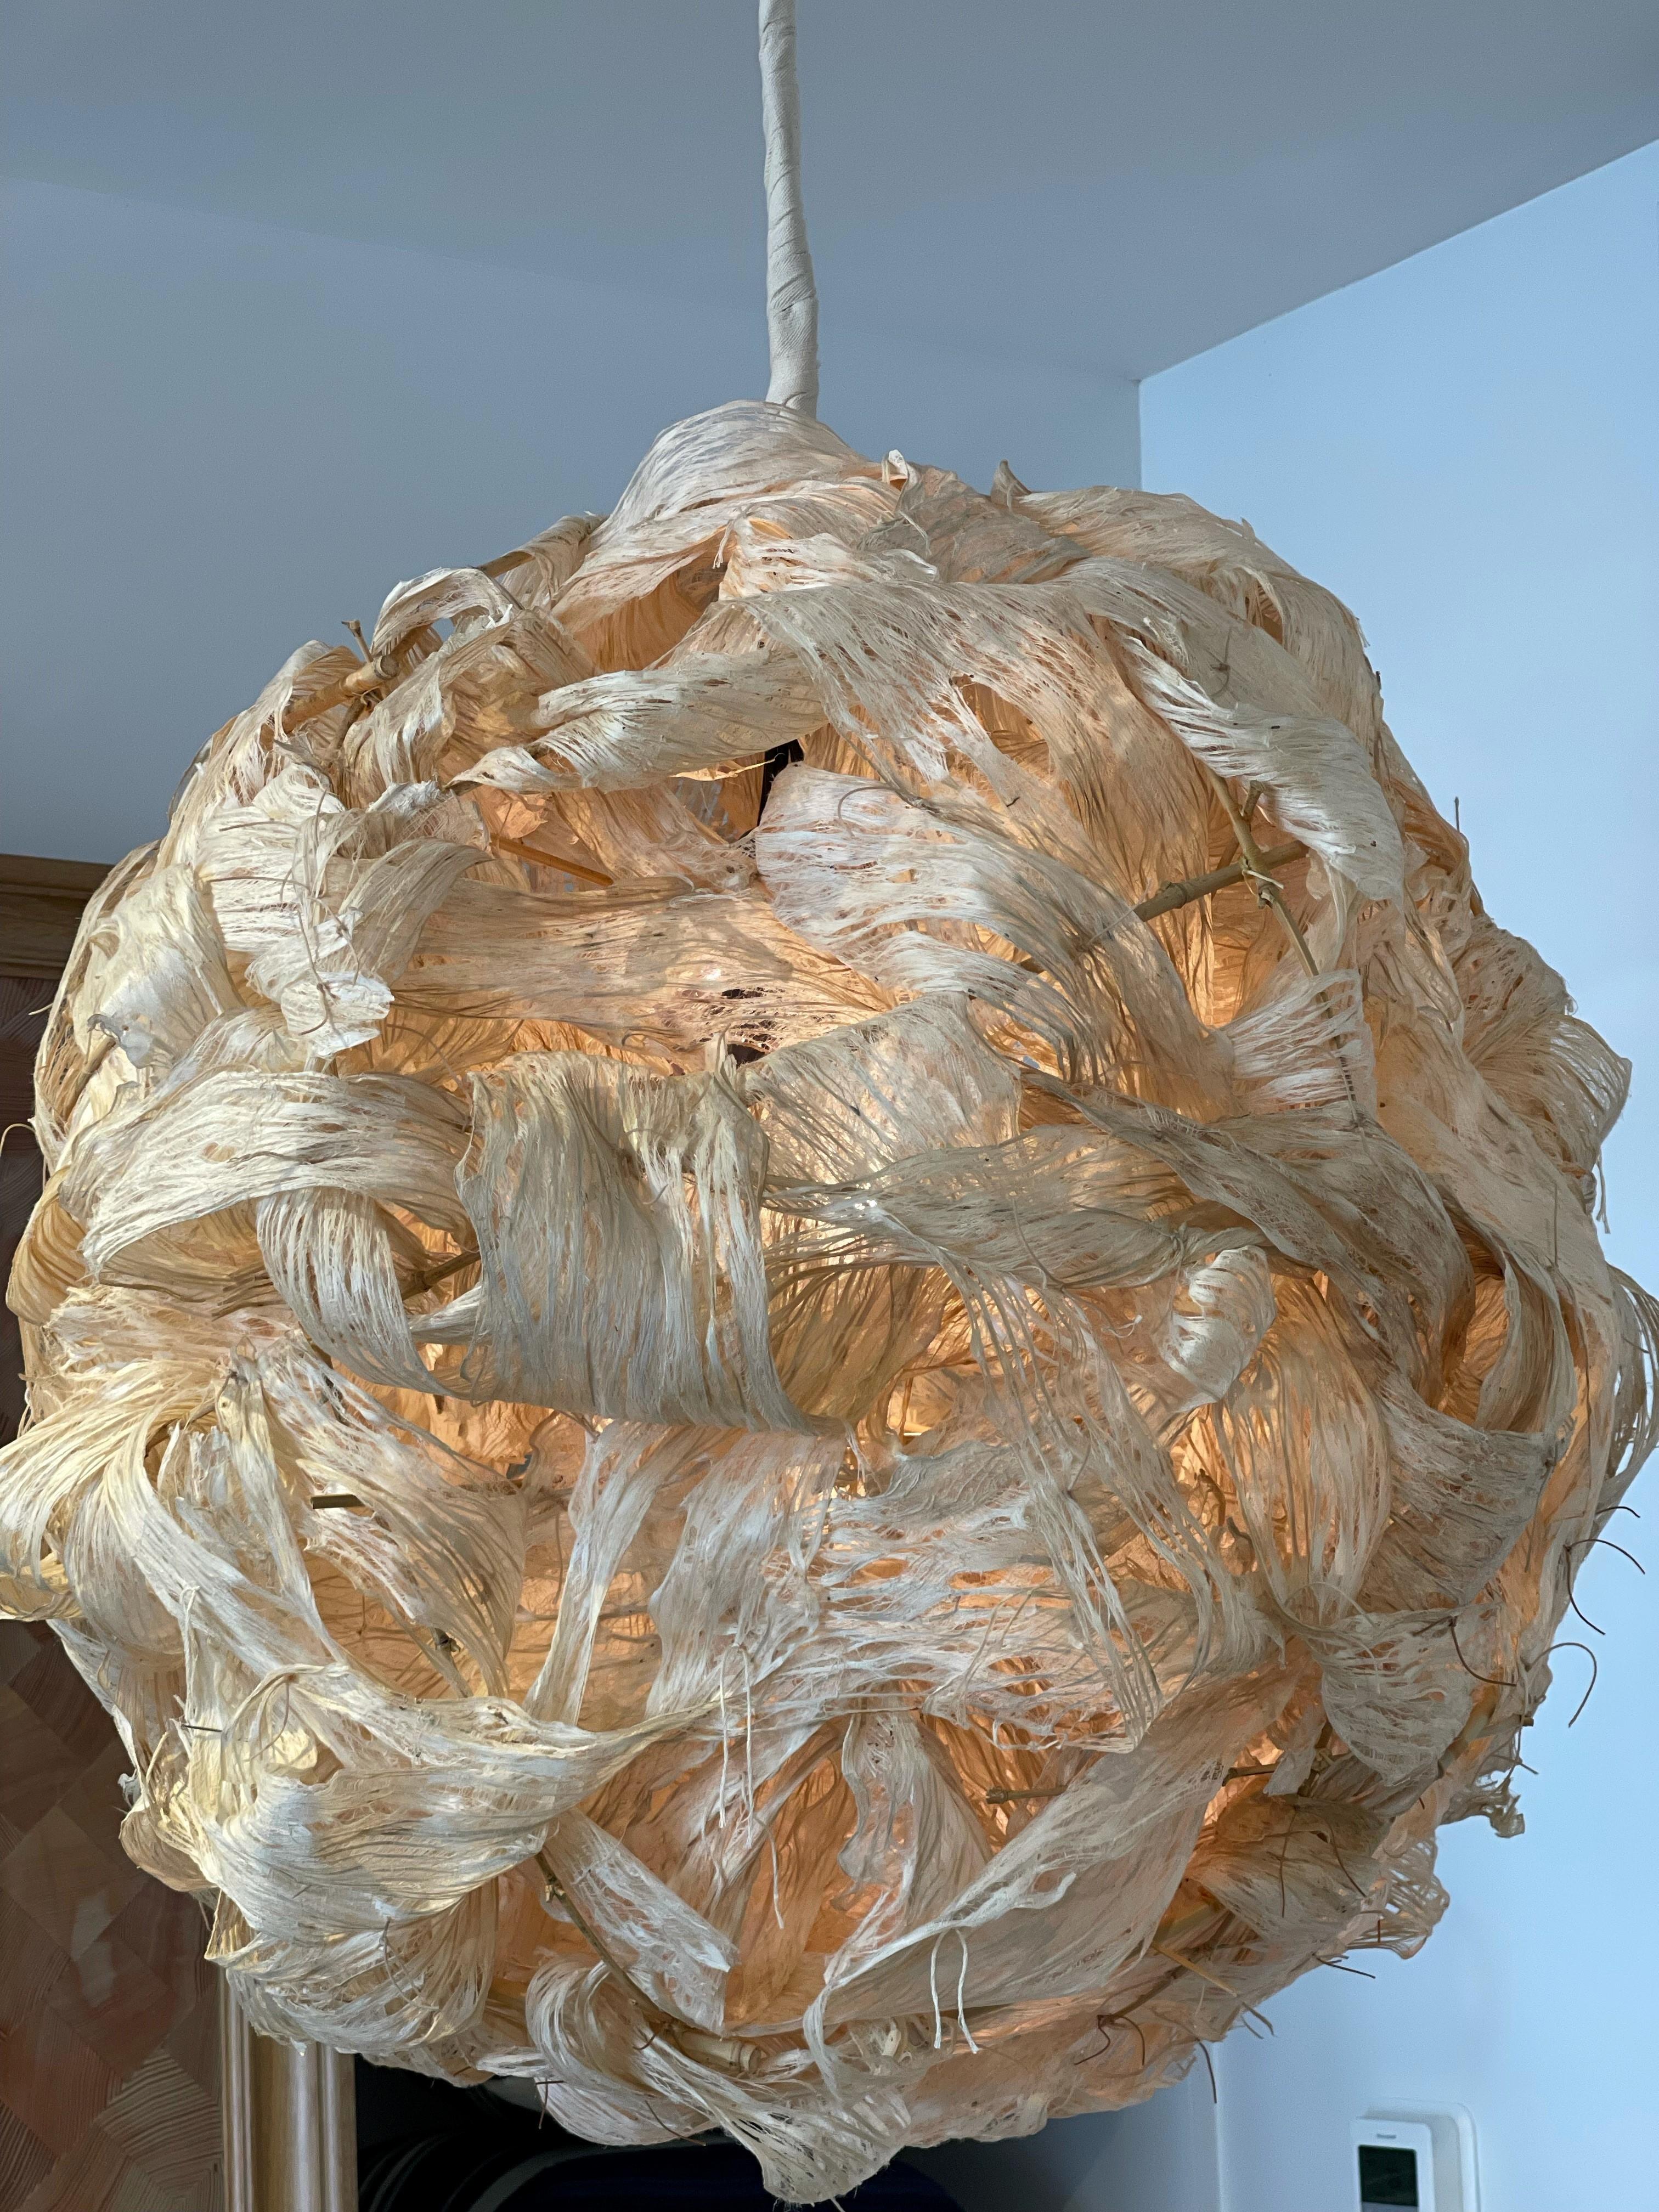 This is a hand crafted chandelier made out of kozo bark lace. Made by a local artisan and currently on display at our shelter island store. It is in 33